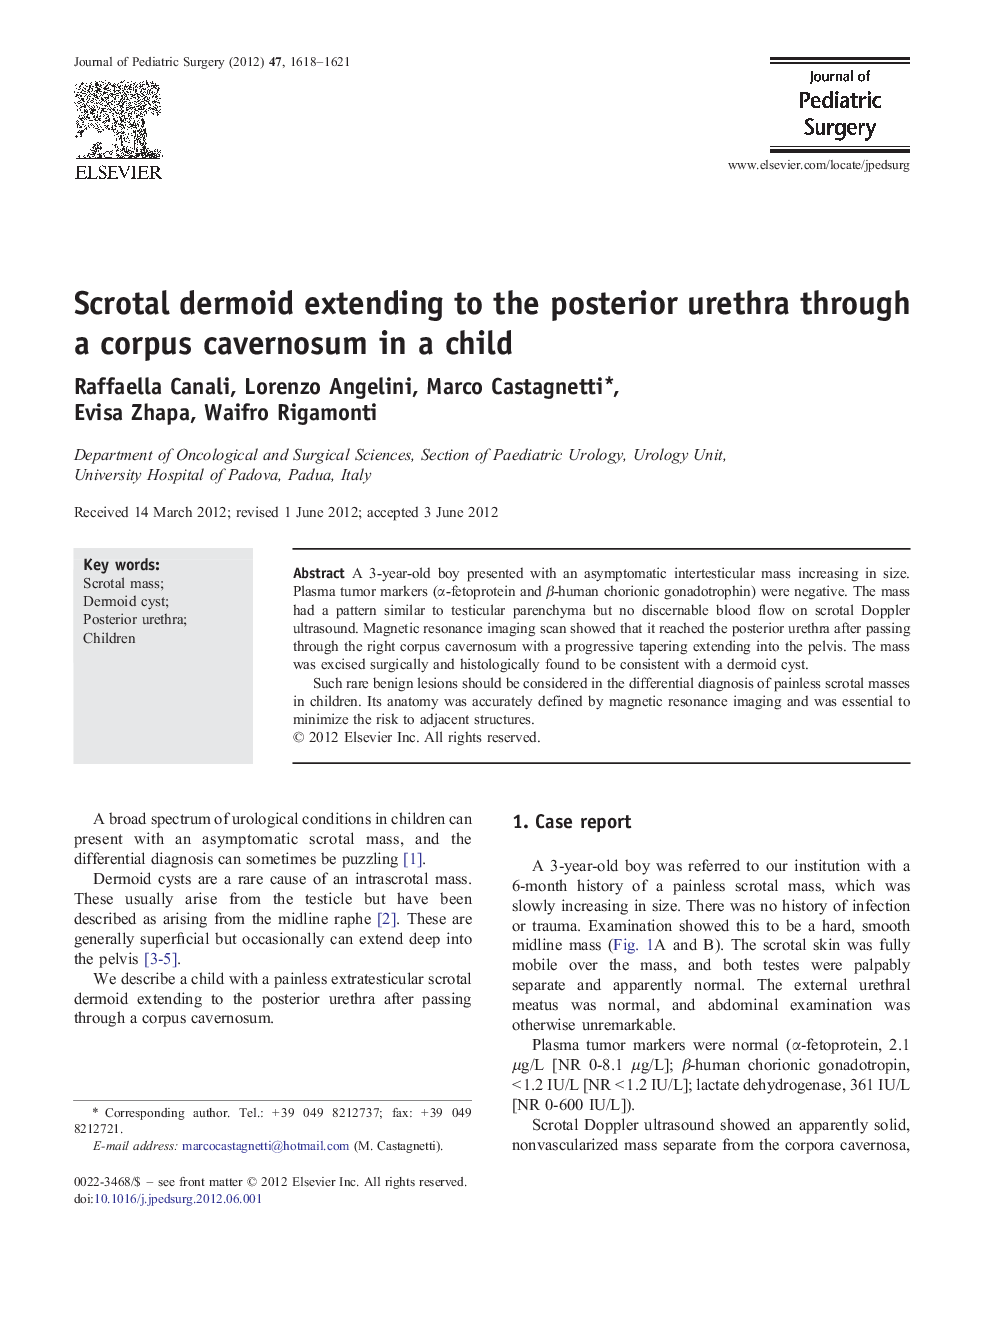 Scrotal dermoid extending to the posterior urethra through a corpus cavernosum in a child